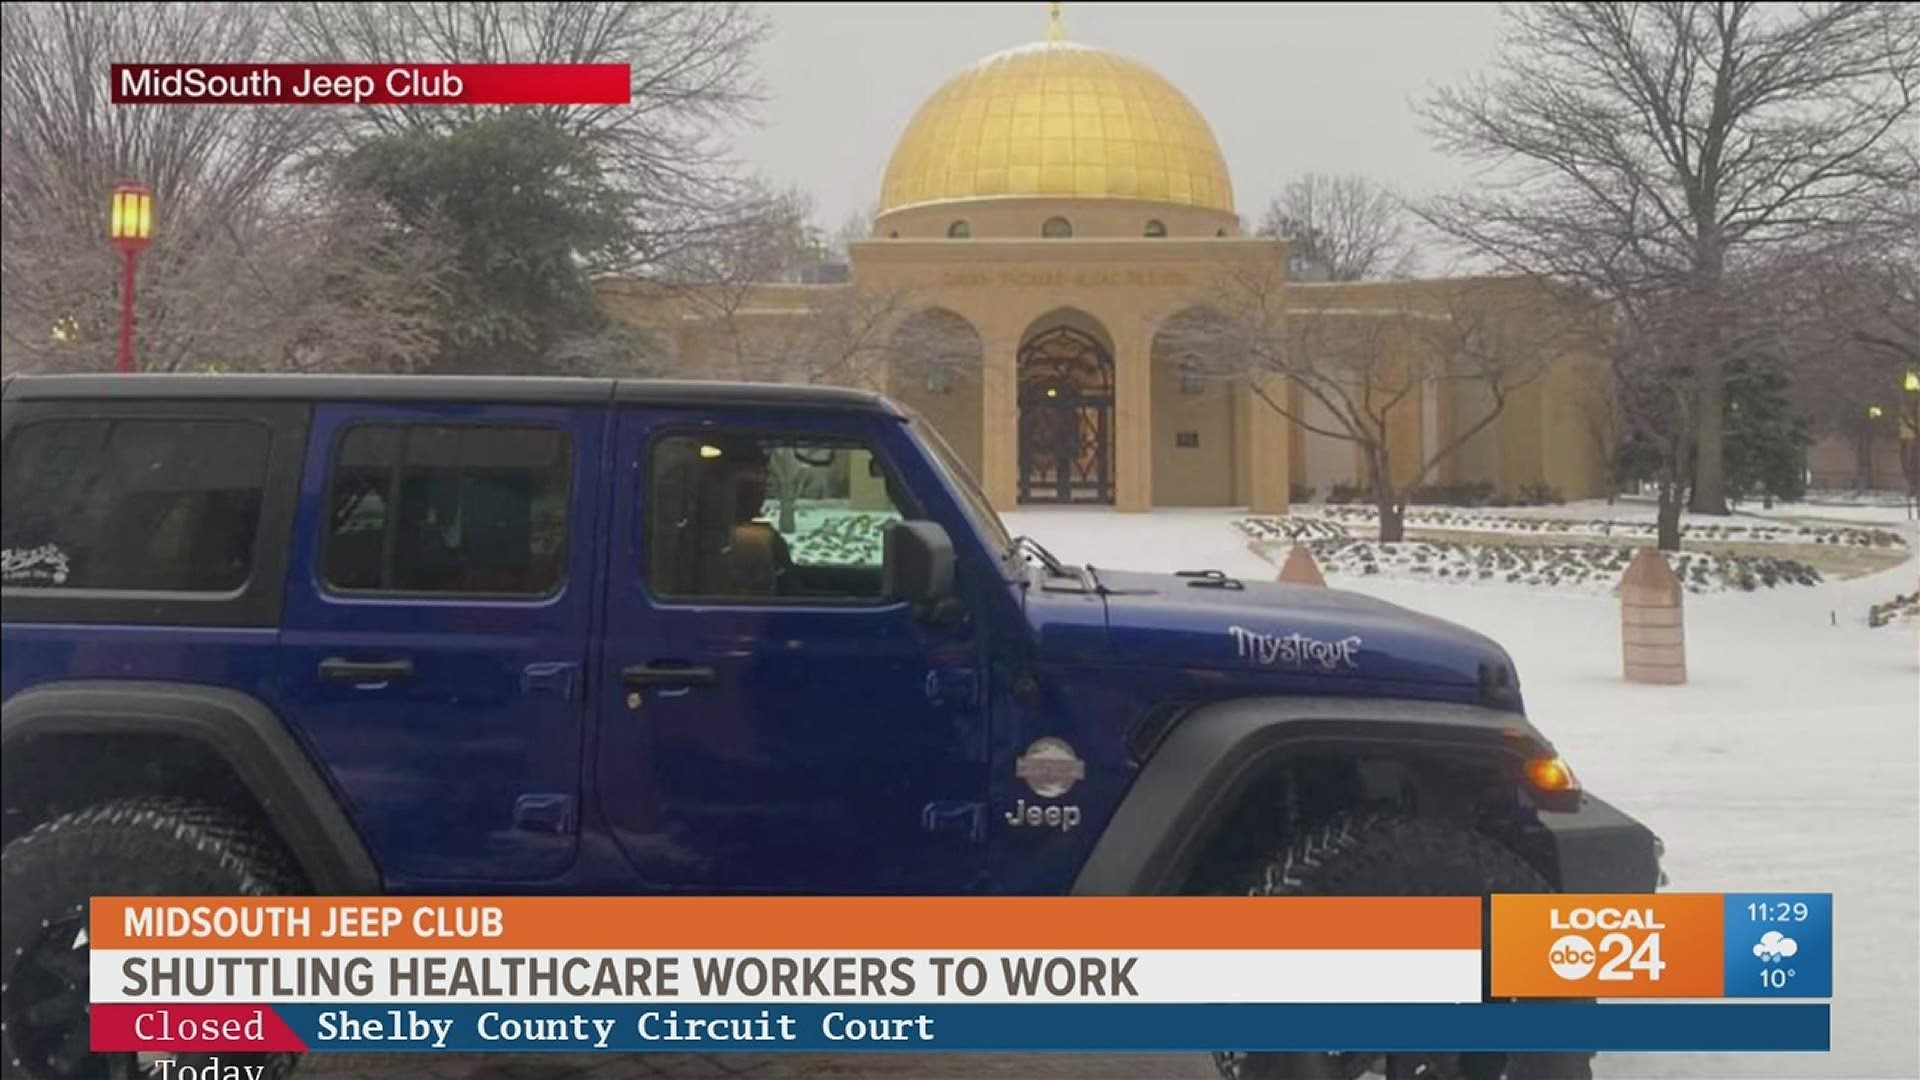 Chris Johnson of the Mid-South Jeep Club helped healthcare workers on their commute Monday while the snow was piling up.